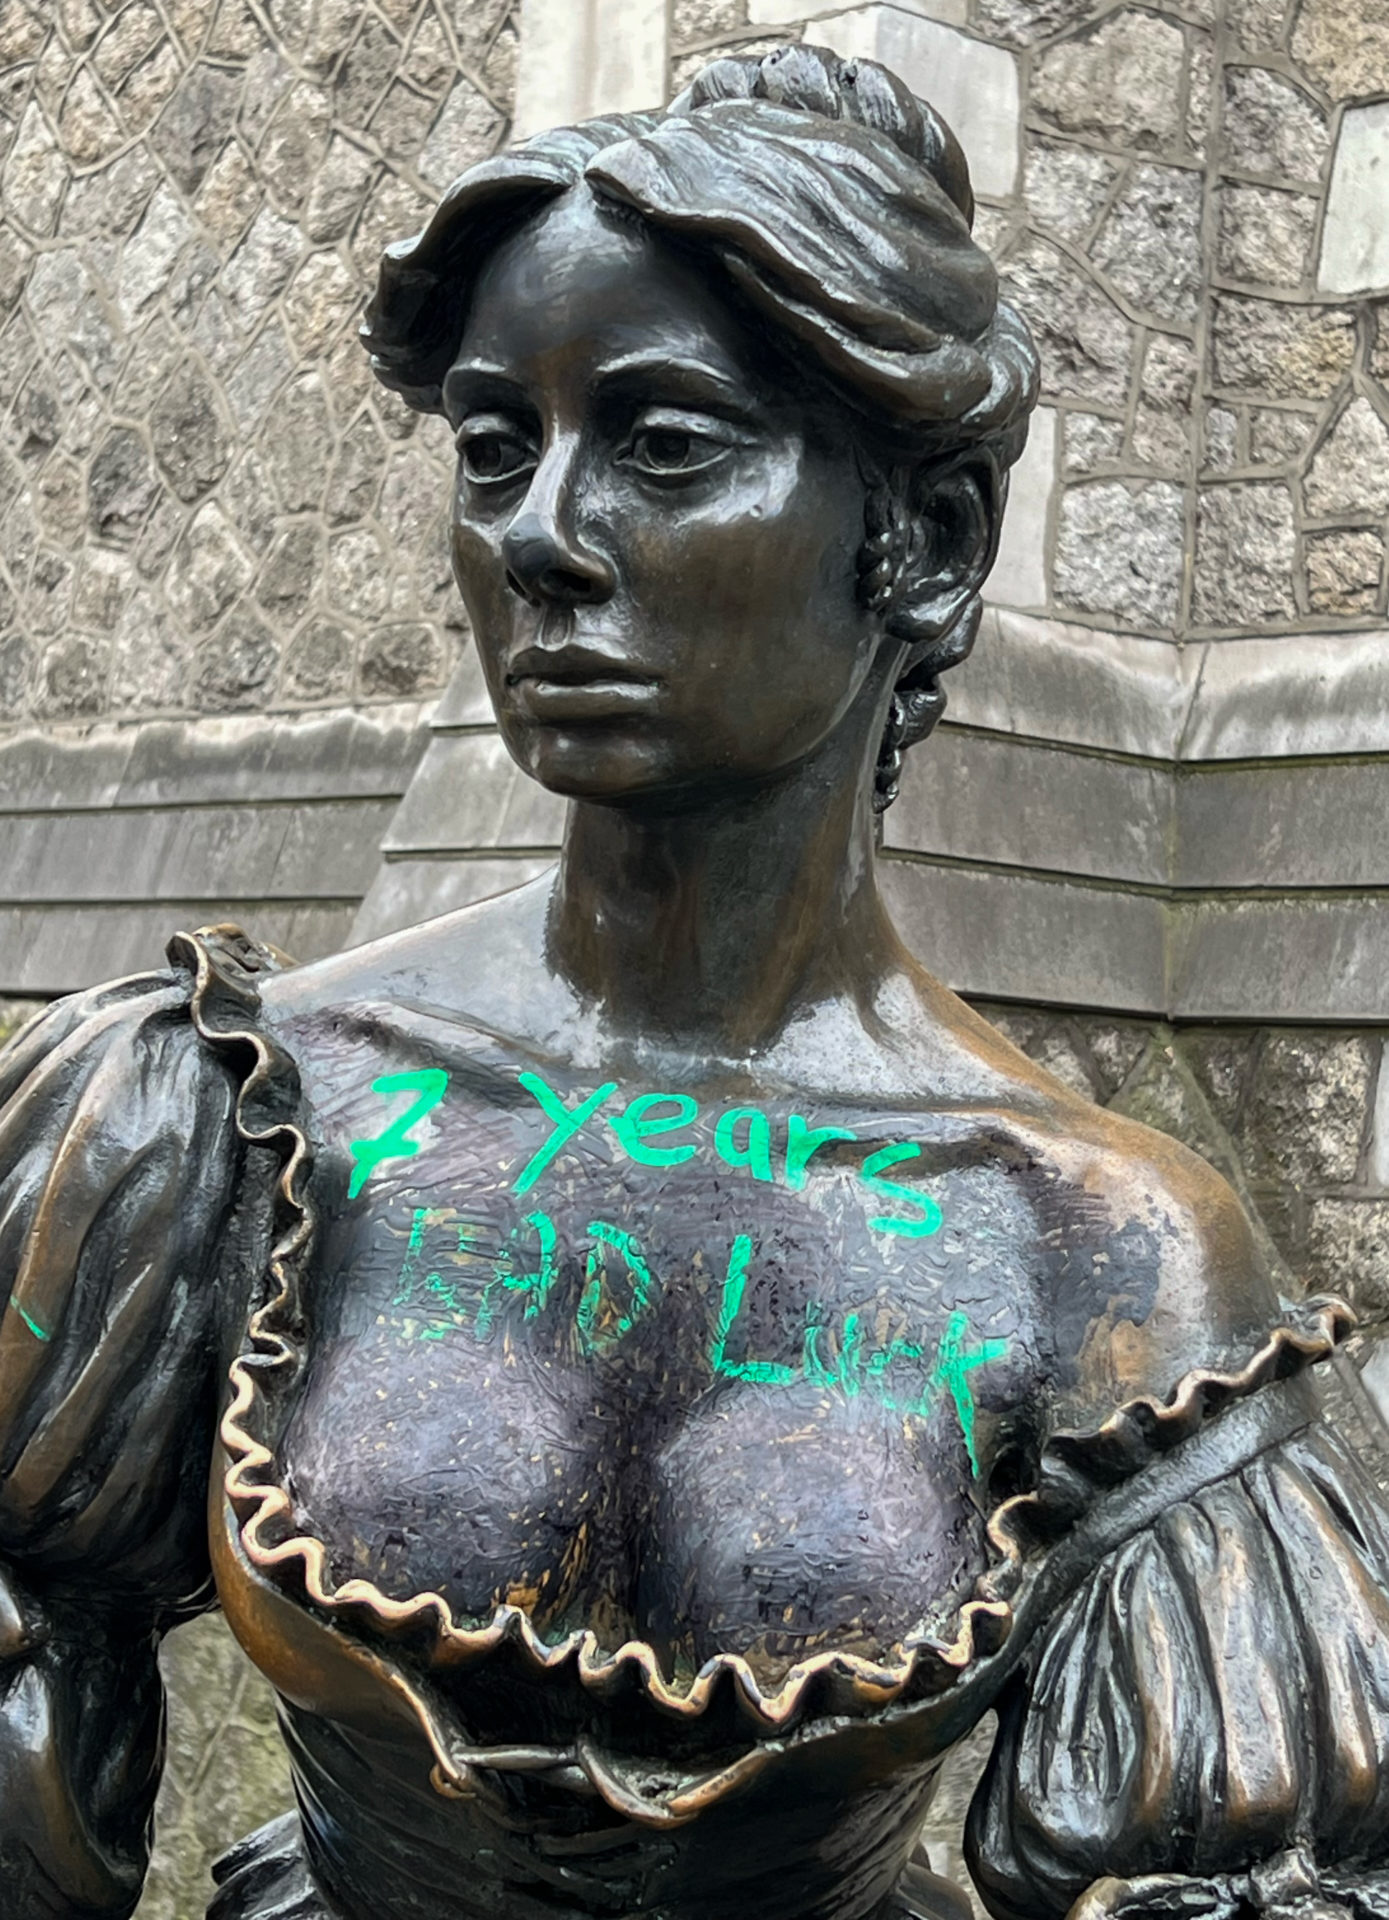 The Molly Malone statue in Dublin City Centre after suffering vandalism for a second time in a week